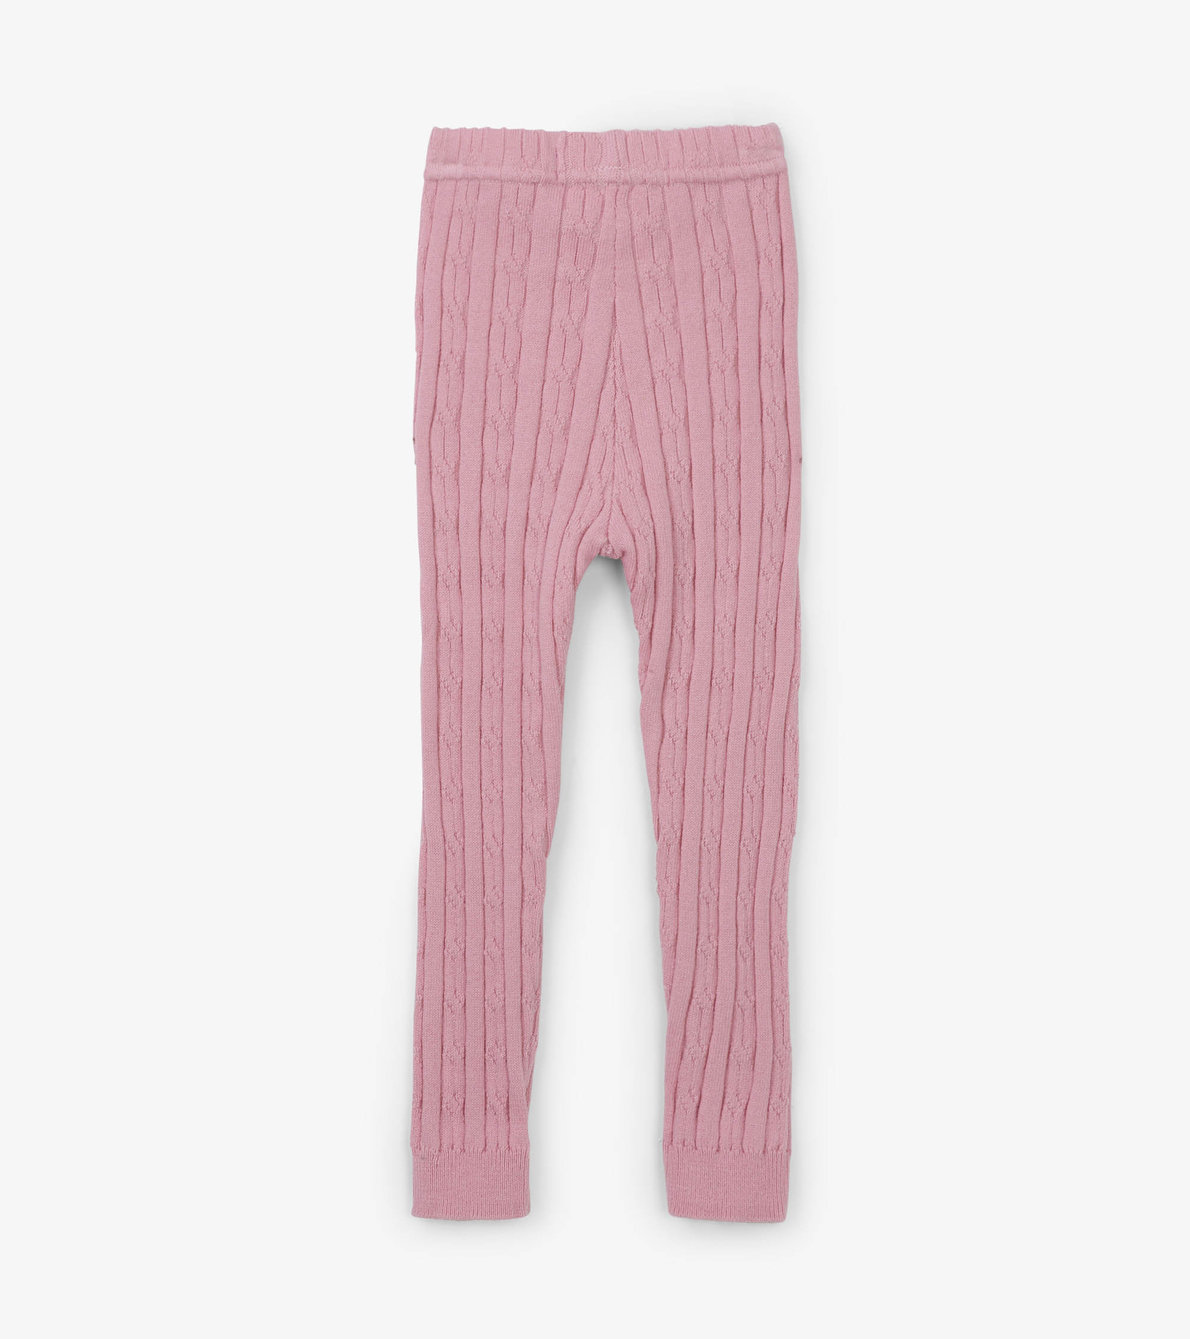 View larger image of Pink Cable Knit Baby Tights